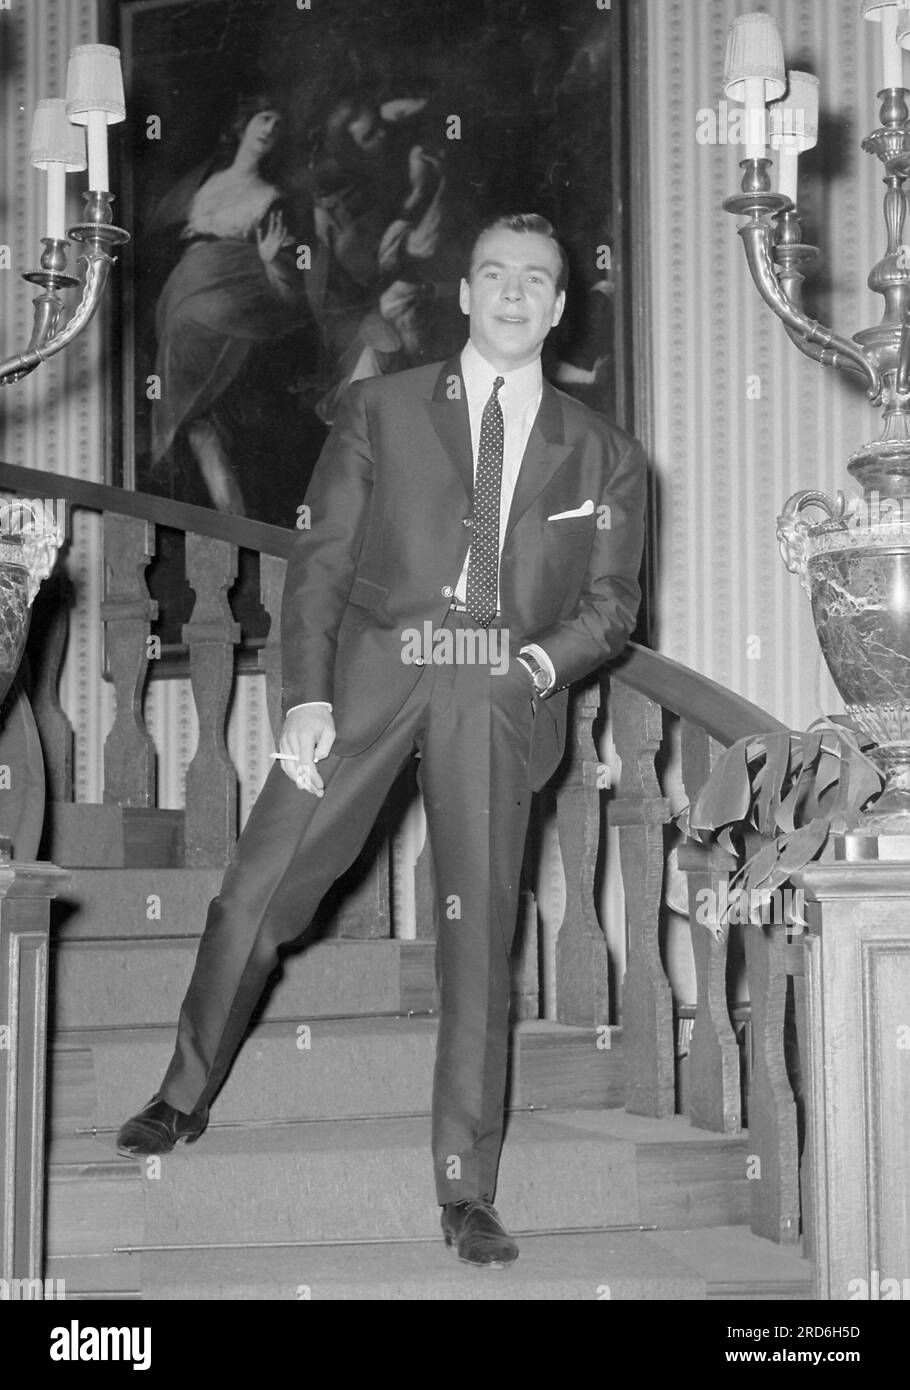 ARCHIVE PHOTO: The actor Goetz George would have been 85 on July 23, 2023, Goetz GEORGE (FRG), actor, full figure, full body, is standing casually in a suit on a staircase with a cigarette in his hand; during the shooting of the feature film 'Waiting room to the afterlife'; Black and white photo, portrait format, on January 31, 1964; ?SVEN SIMON, Princess-Luise-Str.41#45479 Muelheim/Ruhr#tel.0208/9413250#fax 0208/9413260#account 244 293 433 P ostbank E ssen BLZ 360 100 43#www.SvenSimon.net#e-mail :SvenSimon@t-online.de. Stock Photo